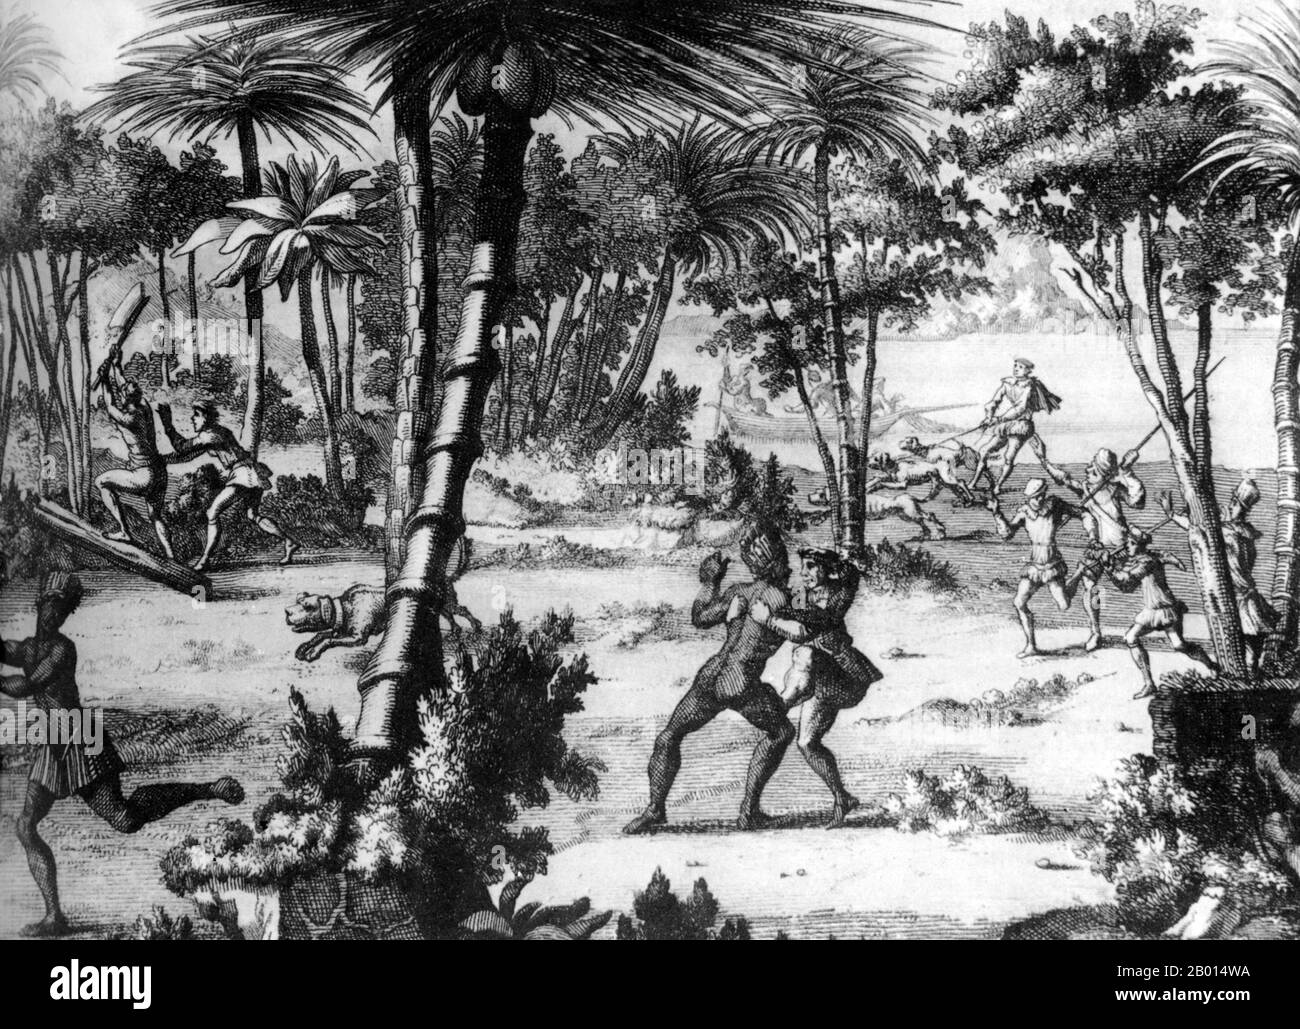 Africa: European slave traders attack and capture victims in Africa. Engraving, c. 17th century.  The Spanish were the first Europeans to transport African slaves to the New World on islands such as Cuba and Hispaniola (now the Dominican Republic and Haiti). They were soon followed by the Portuguese, France, Britain and the Netherlands. The alarming death rate in the native population spurred the first royal laws protecting them (Laws of Burgos, 1512–1513). The first African slaves arrived in Hispaniola in 1501 soon after the Papal Bull of 1493 gave all of the New World to Spain. Stock Photo